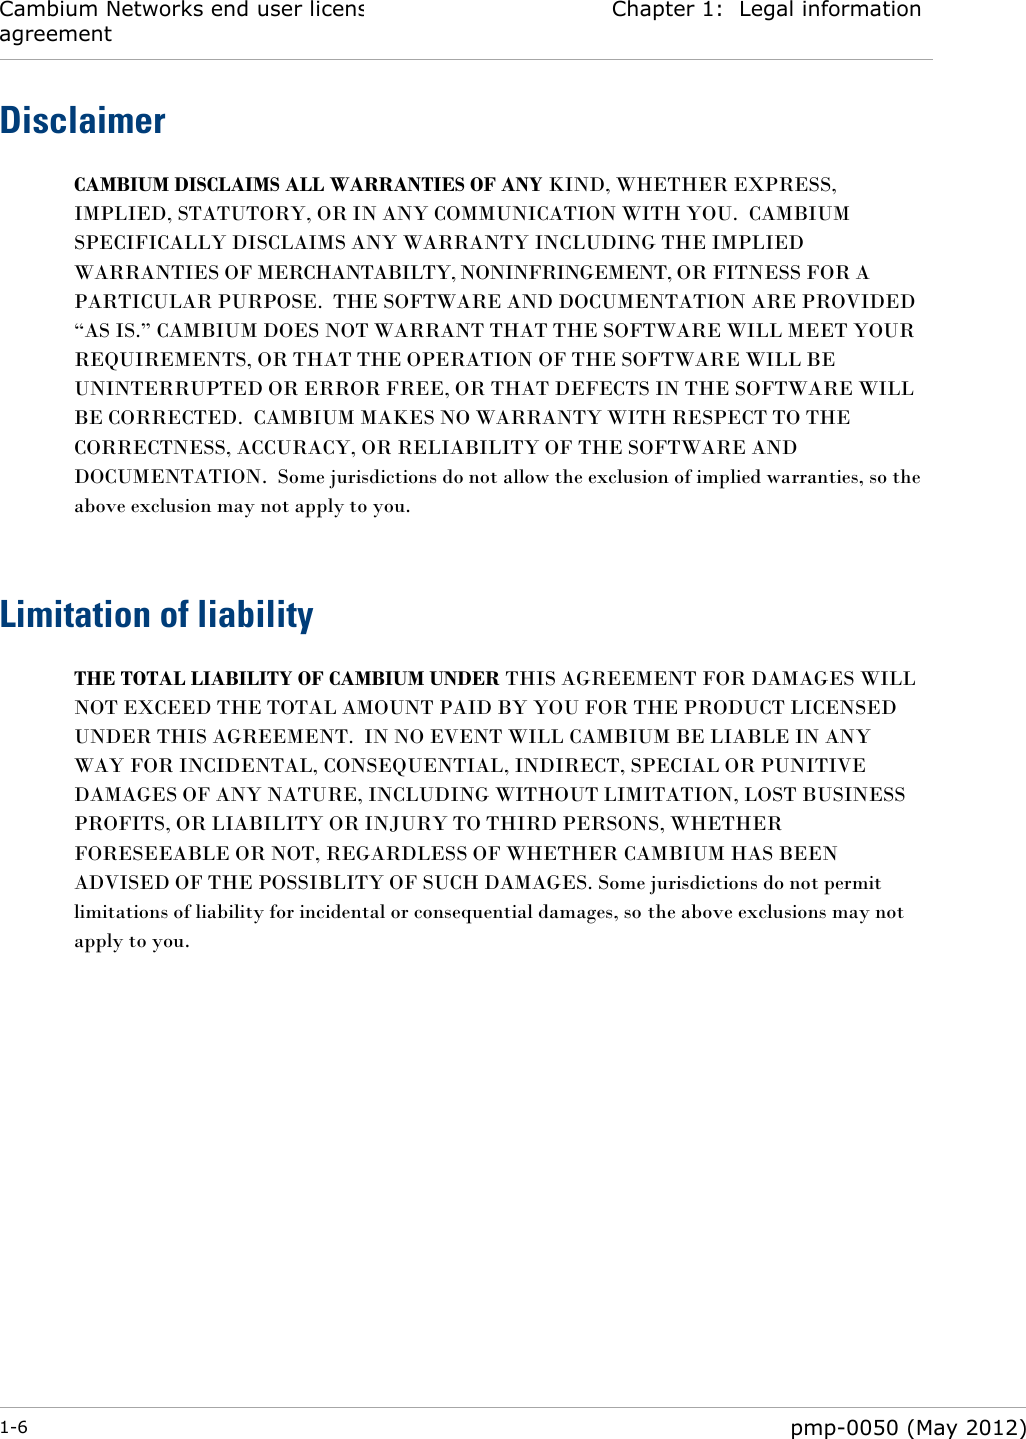 Cambium Networks end user license agreement Chapter 1:  Legal information  1-6  pmp-0050 (May 2012)  Disclaimer CAMBIUM DISCLAIMS ALL WARRANTIES OF ANY KIND, WHETHER EXPRESS, IMPLIED, STATUTORY, OR IN ANY COMMUNICATION WITH YOU.  CAMBIUM SPECIFICALLY DISCLAIMS ANY WARRANTY INCLUDING THE IMPLIED WARRANTIES OF MERCHANTABILTY, NONINFRINGEMENT, OR FITNESS FOR A PARTICULAR PURPOSE.  THE SOFTWARE AND DOCUMENTATION ARE PROVIDED ―AS IS.‖ CAMBIUM DOES NOT WARRANT THAT THE SOFTWARE WILL MEET YOUR REQUIREMENTS, OR THAT THE OPERATION OF THE SOFTWARE WILL BE UNINTERRUPTED OR ERROR FREE, OR THAT DEFECTS IN THE SOFTWARE WILL BE CORRECTED.  CAMBIUM MAKES NO WARRANTY WITH RESPECT TO THE CORRECTNESS, ACCURACY, OR RELIABILITY OF THE SOFTWARE AND DOCUMENTATION.  Some jurisdictions do not allow the exclusion of implied warranties, so the above exclusion may not apply to you.   Limitation of liability THE TOTAL LIABILITY OF CAMBIUM UNDER THIS AGREEMENT FOR DAMAGES WILL NOT EXCEED THE TOTAL AMOUNT PAID BY YOU FOR THE PRODUCT LICENSED UNDER THIS AGREEMENT.  IN NO EVENT WILL CAMBIUM BE LIABLE IN ANY WAY FOR INCIDENTAL, CONSEQUENTIAL, INDIRECT, SPECIAL OR PUNITIVE DAMAGES OF ANY NATURE, INCLUDING WITHOUT LIMITATION, LOST BUSINESS PROFITS, OR LIABILITY OR INJURY TO THIRD PERSONS, WHETHER FORESEEABLE OR NOT, REGARDLESS OF WHETHER CAMBIUM HAS BEEN ADVISED OF THE POSSIBLITY OF SUCH DAMAGES. Some jurisdictions do not permit limitations of liability for incidental or consequential damages, so the above exclusions may not apply to you.   